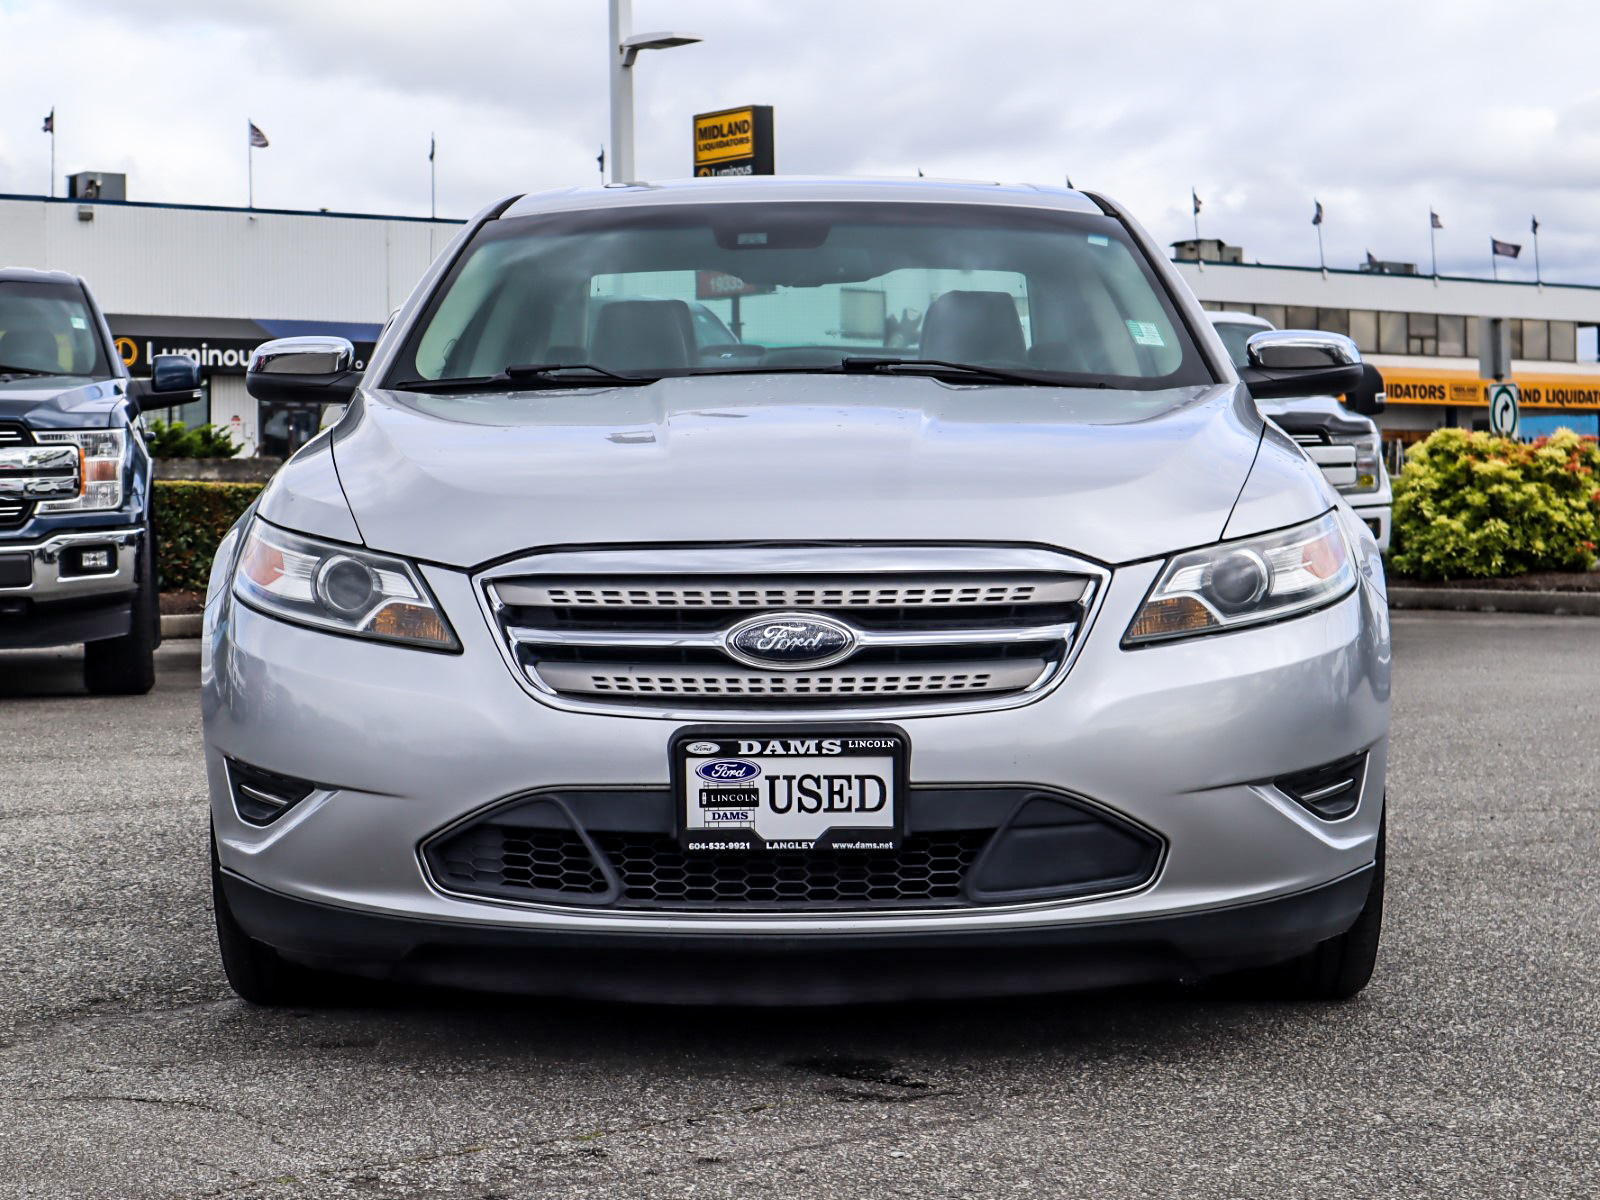 2010 Ford TAURUS LIMITED